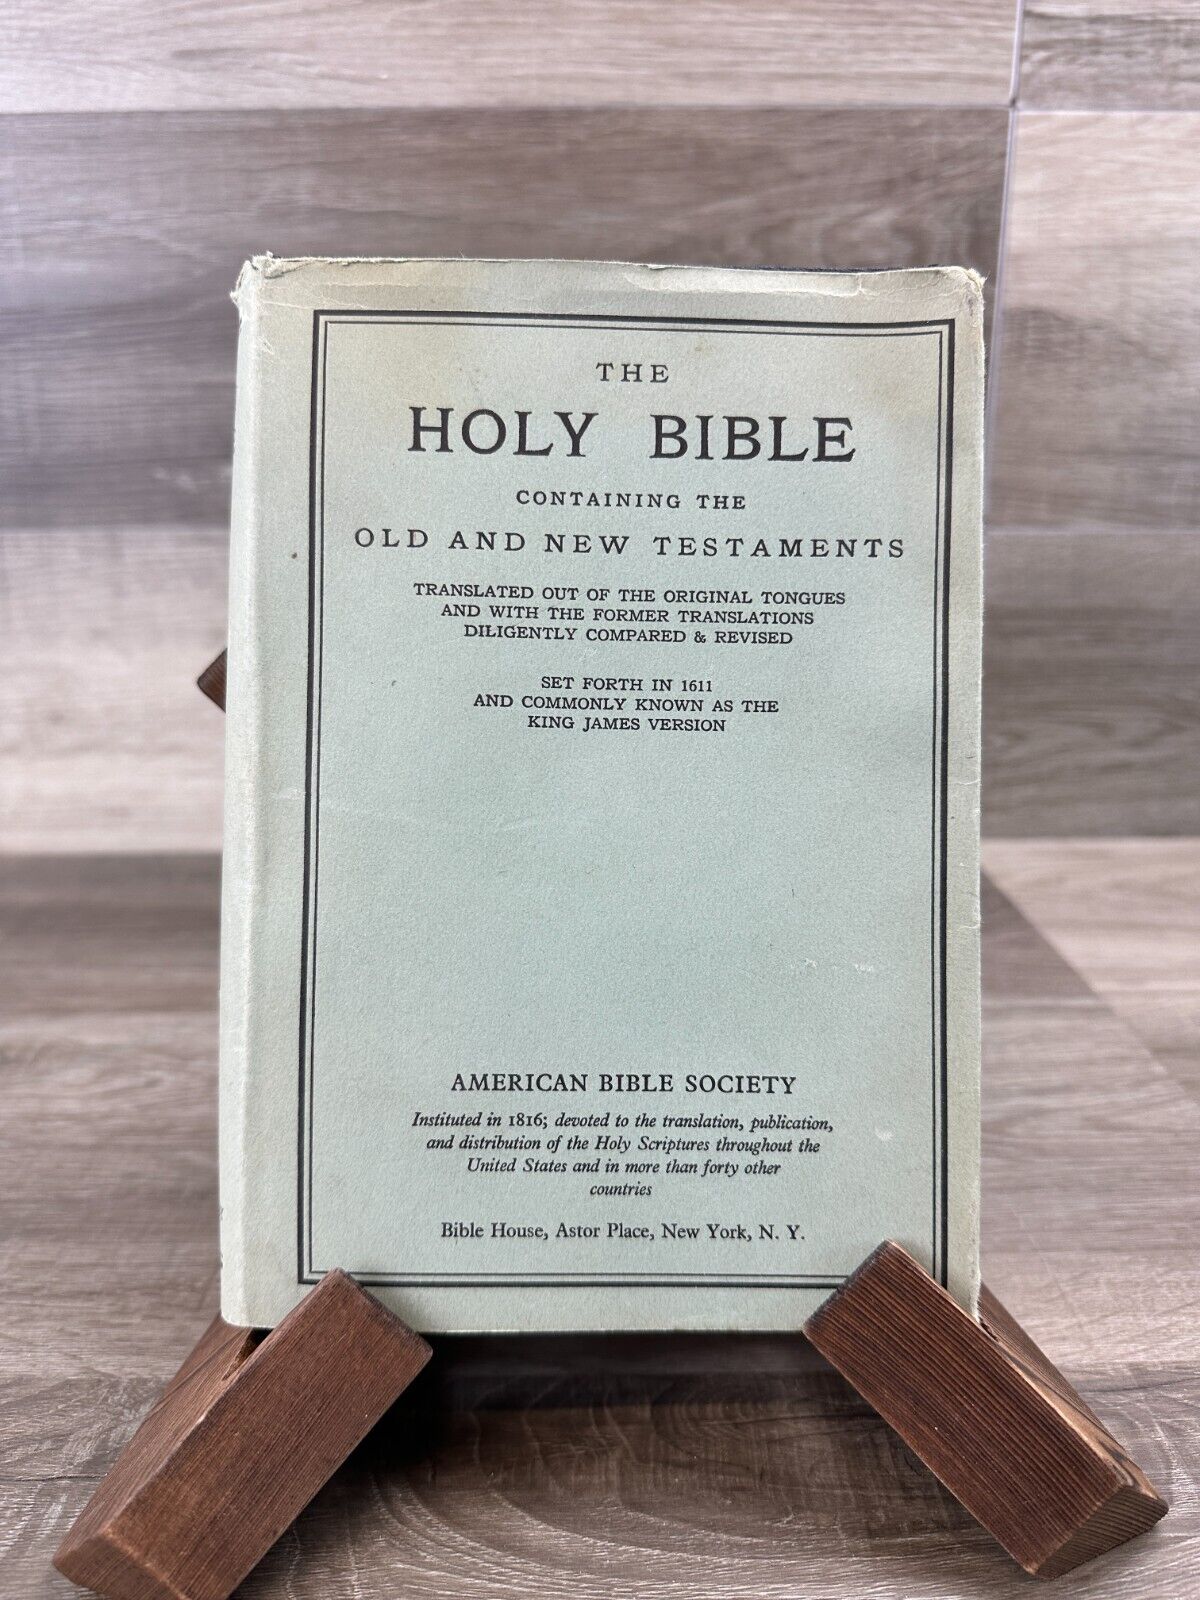 The Holy Bible Containing the Old and New Testaments American Bible Society 1942